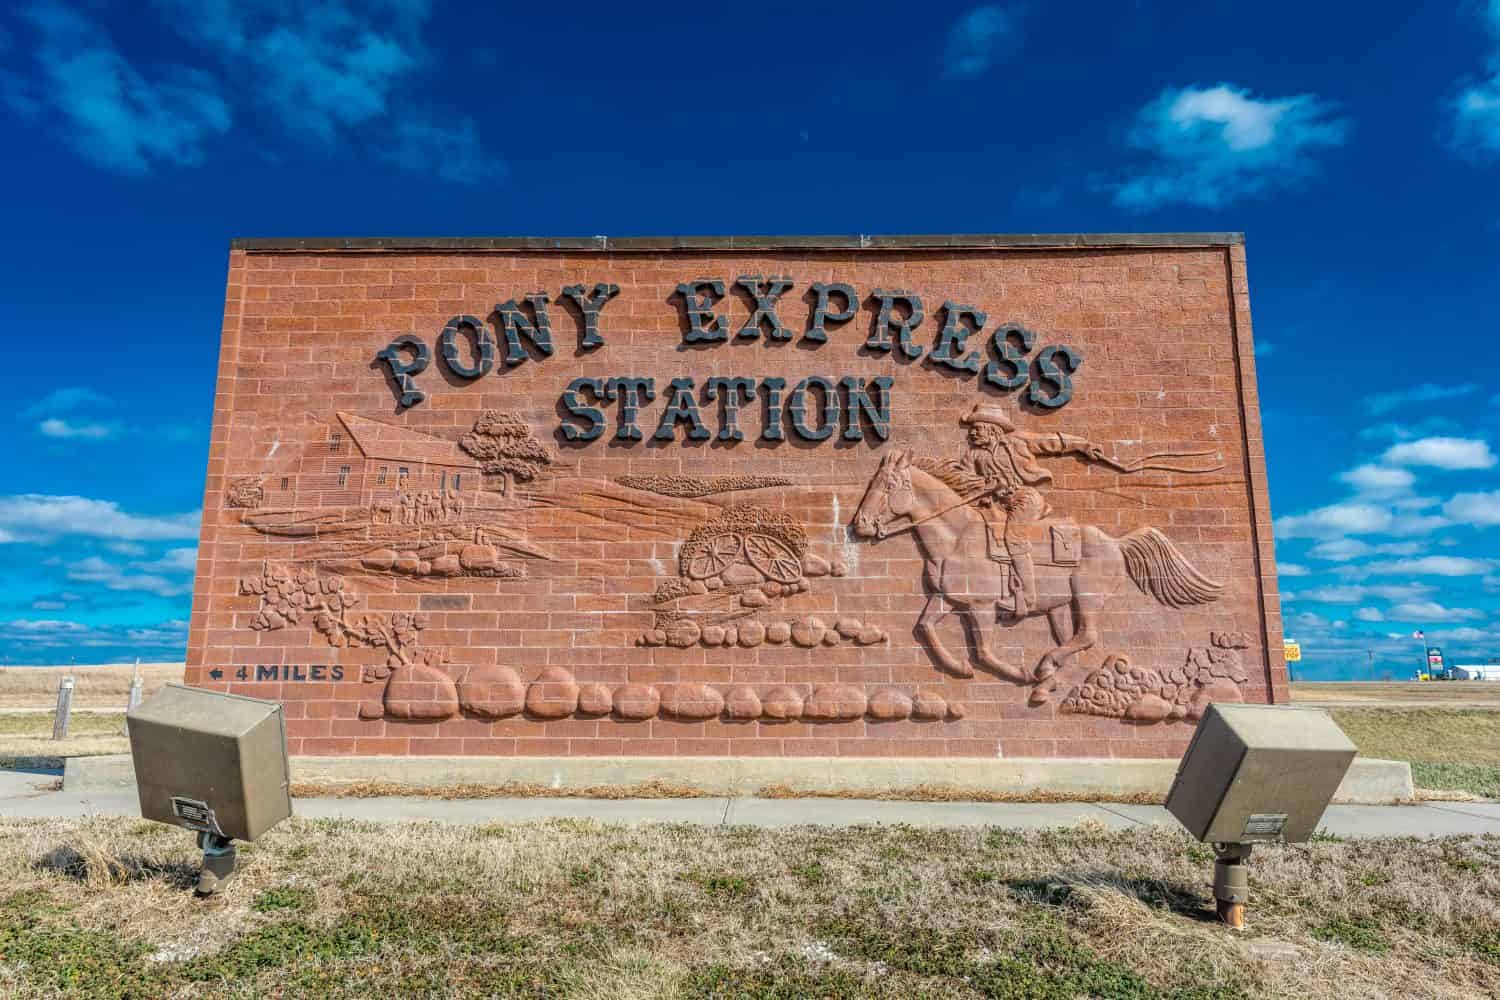 Pony Express Sign, Hollenberg Ranch, Off Route 36, Nebraska marks the spot in 1860/61 that Pony Express functioned